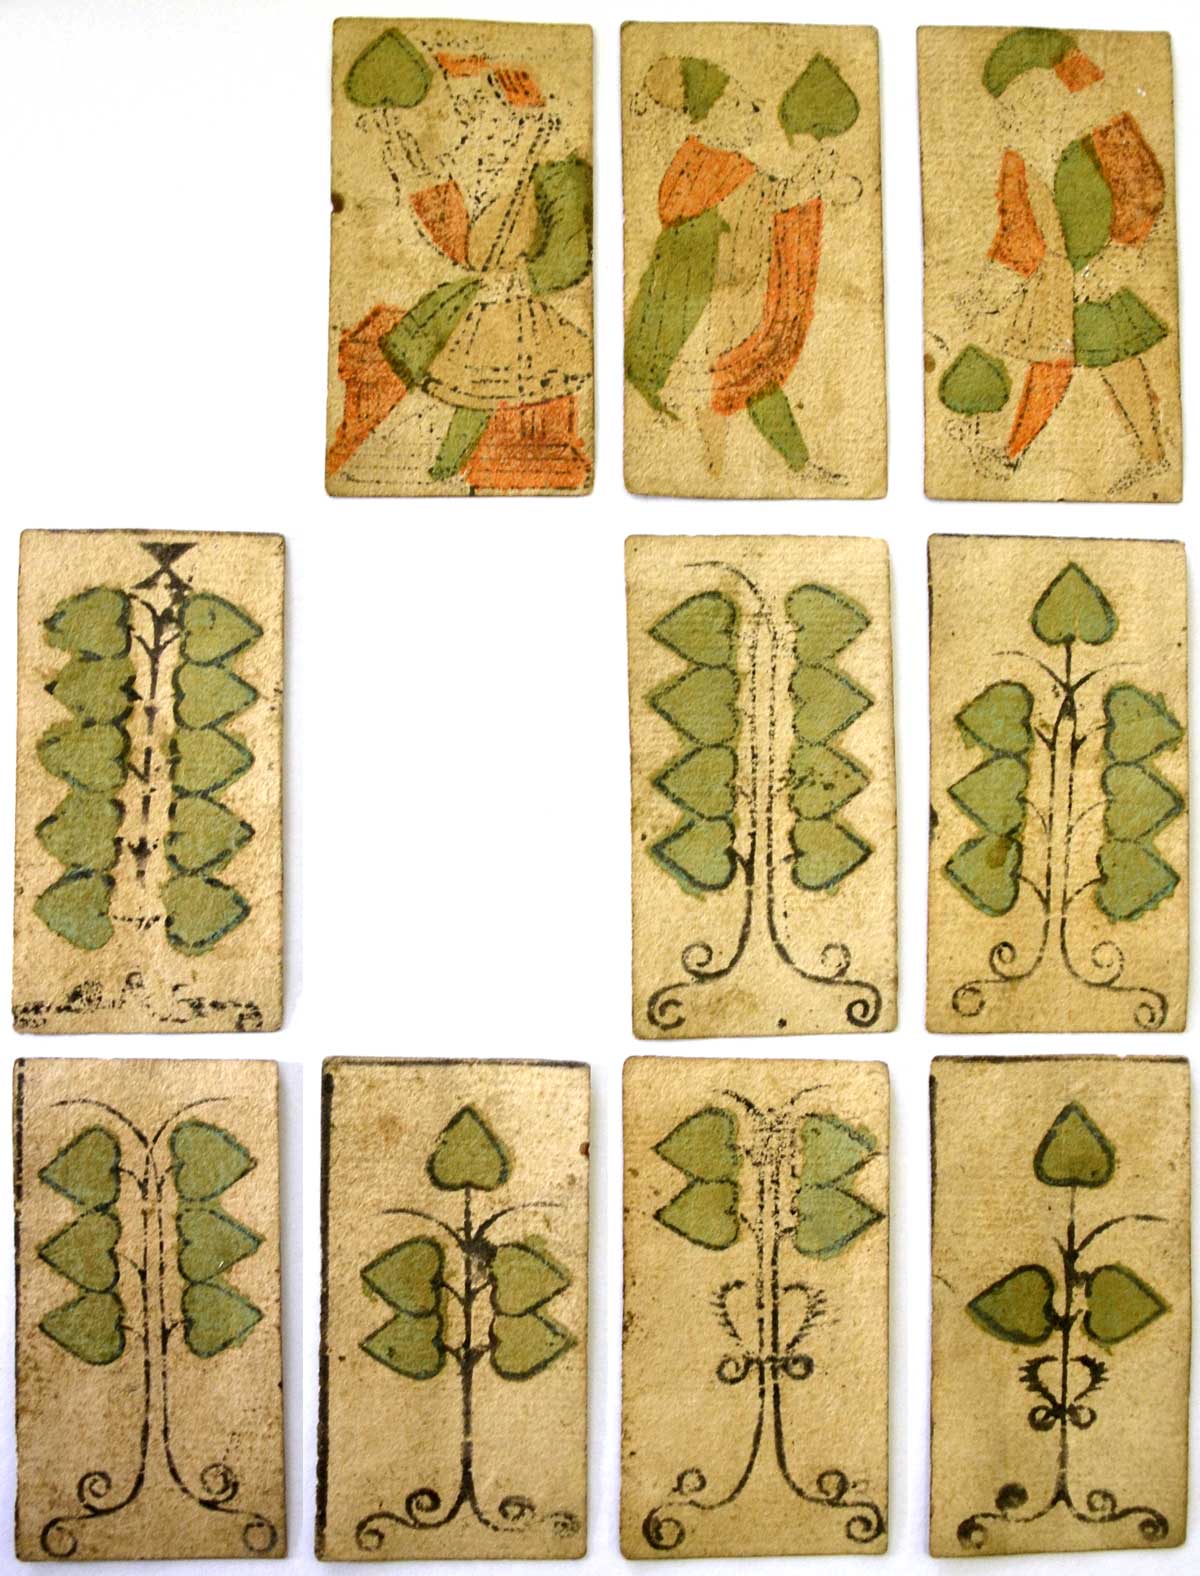 Bohemian playing cards of the German type manufactured by Georg Kapfler and dated 1611